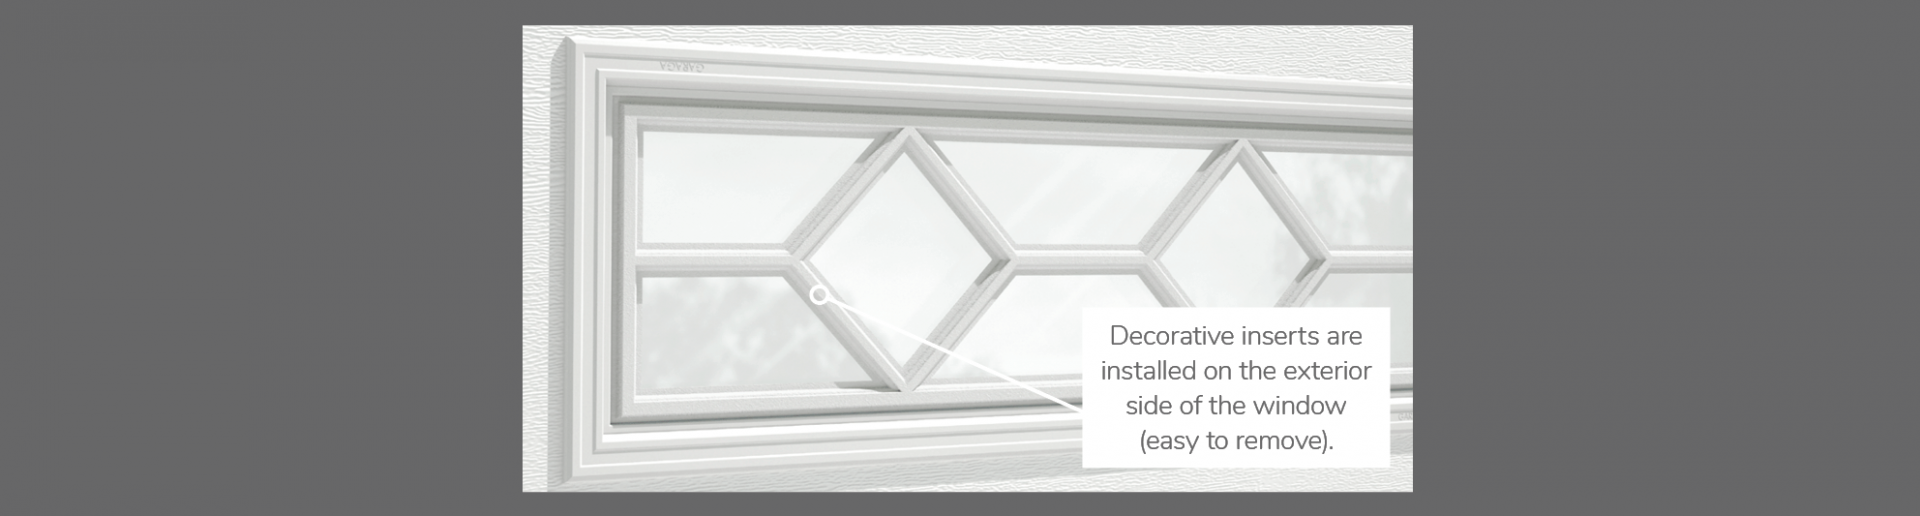 Waterton Decorative Insert, 21" x 13" and 40" x 13", available for door R-16